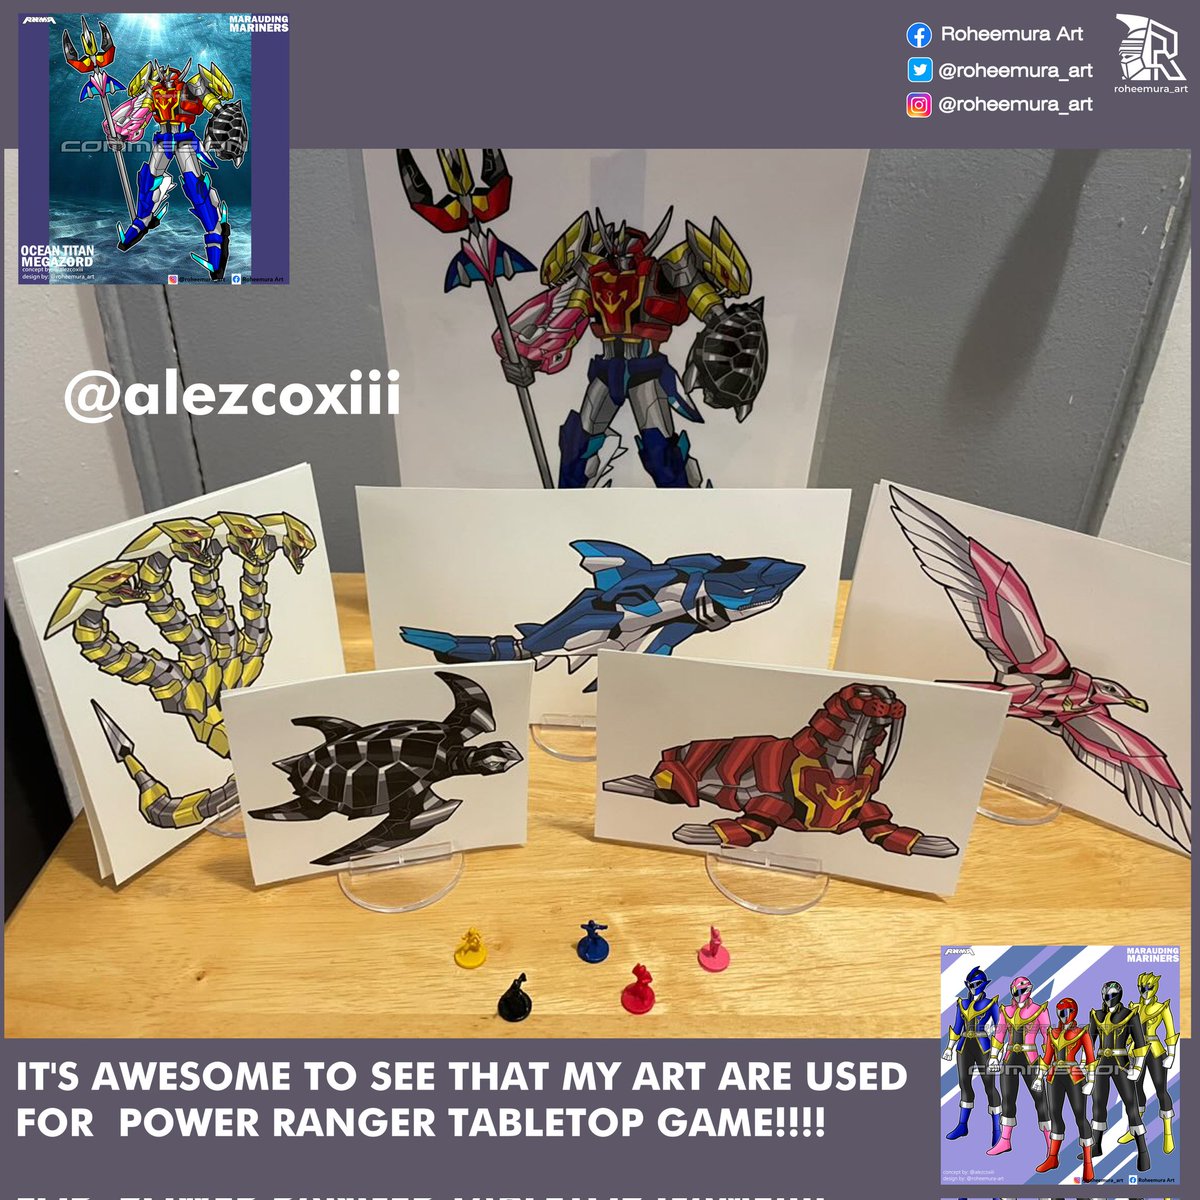 It's awesome to see that my art is used for a Power Rangers Tabletop Game!!!!!! 
Shout out to @alezcoxiii 
. Love this

#supersentai #特撮
#tokusatsu #powerrangers #mightymorphinpowerrangers #mmpr #giantrobot #mechagattai #gattai #zords #megazord #tabletopgames